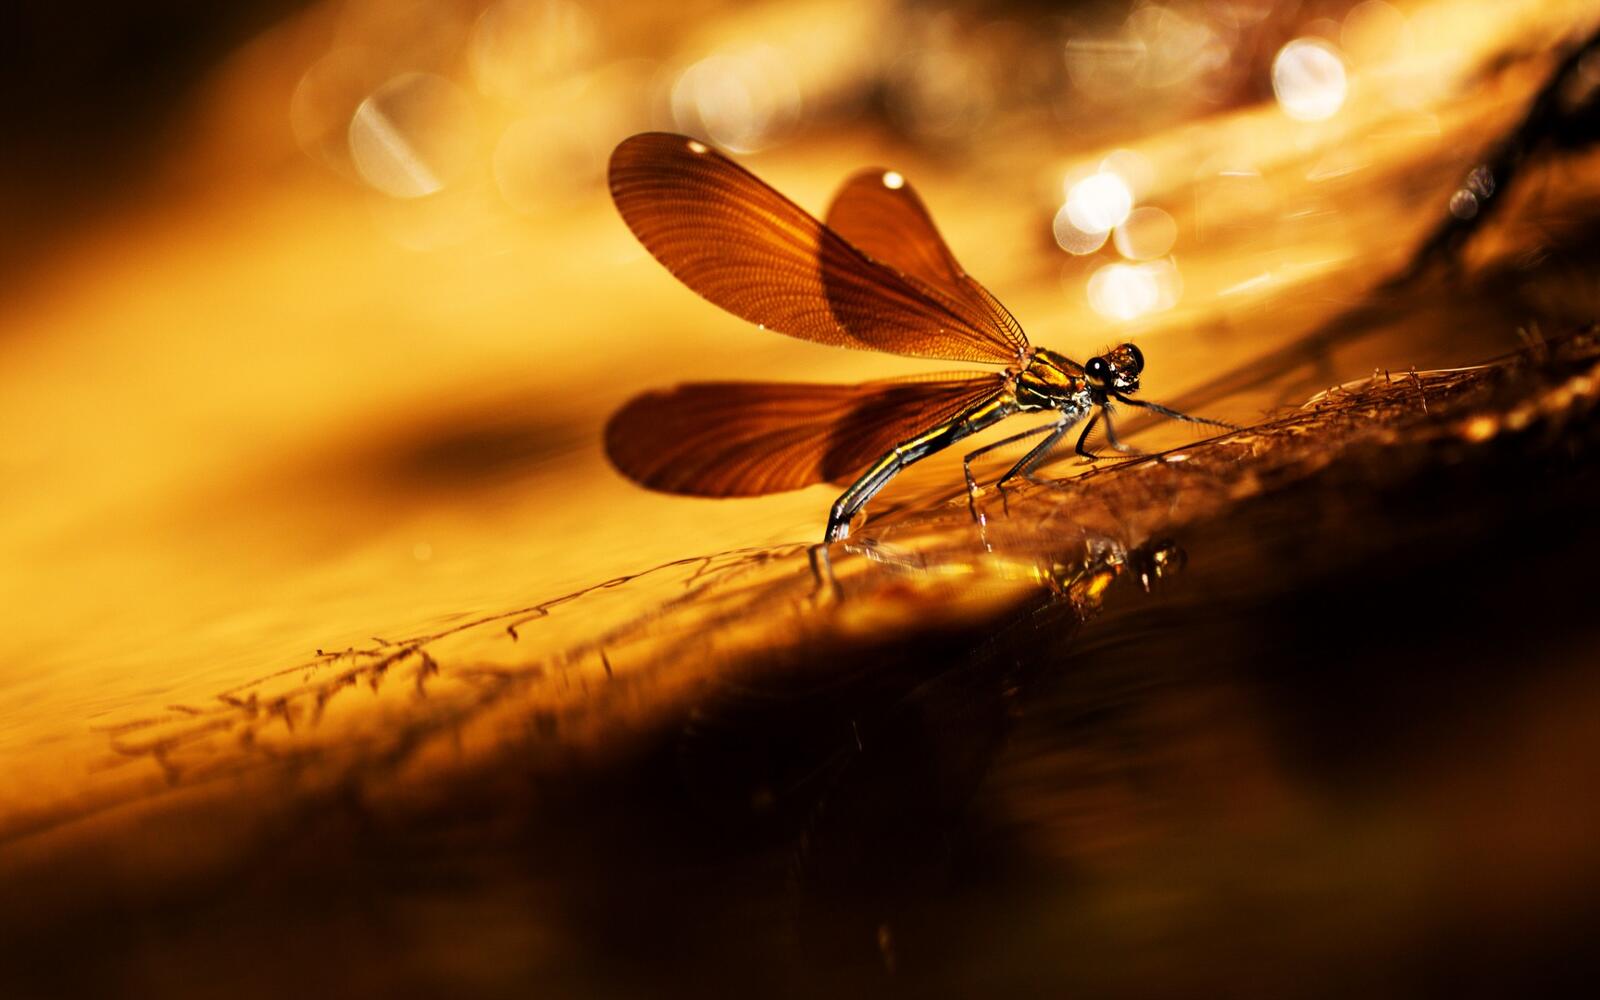 Wallpapers paws dragonfly insects on the desktop